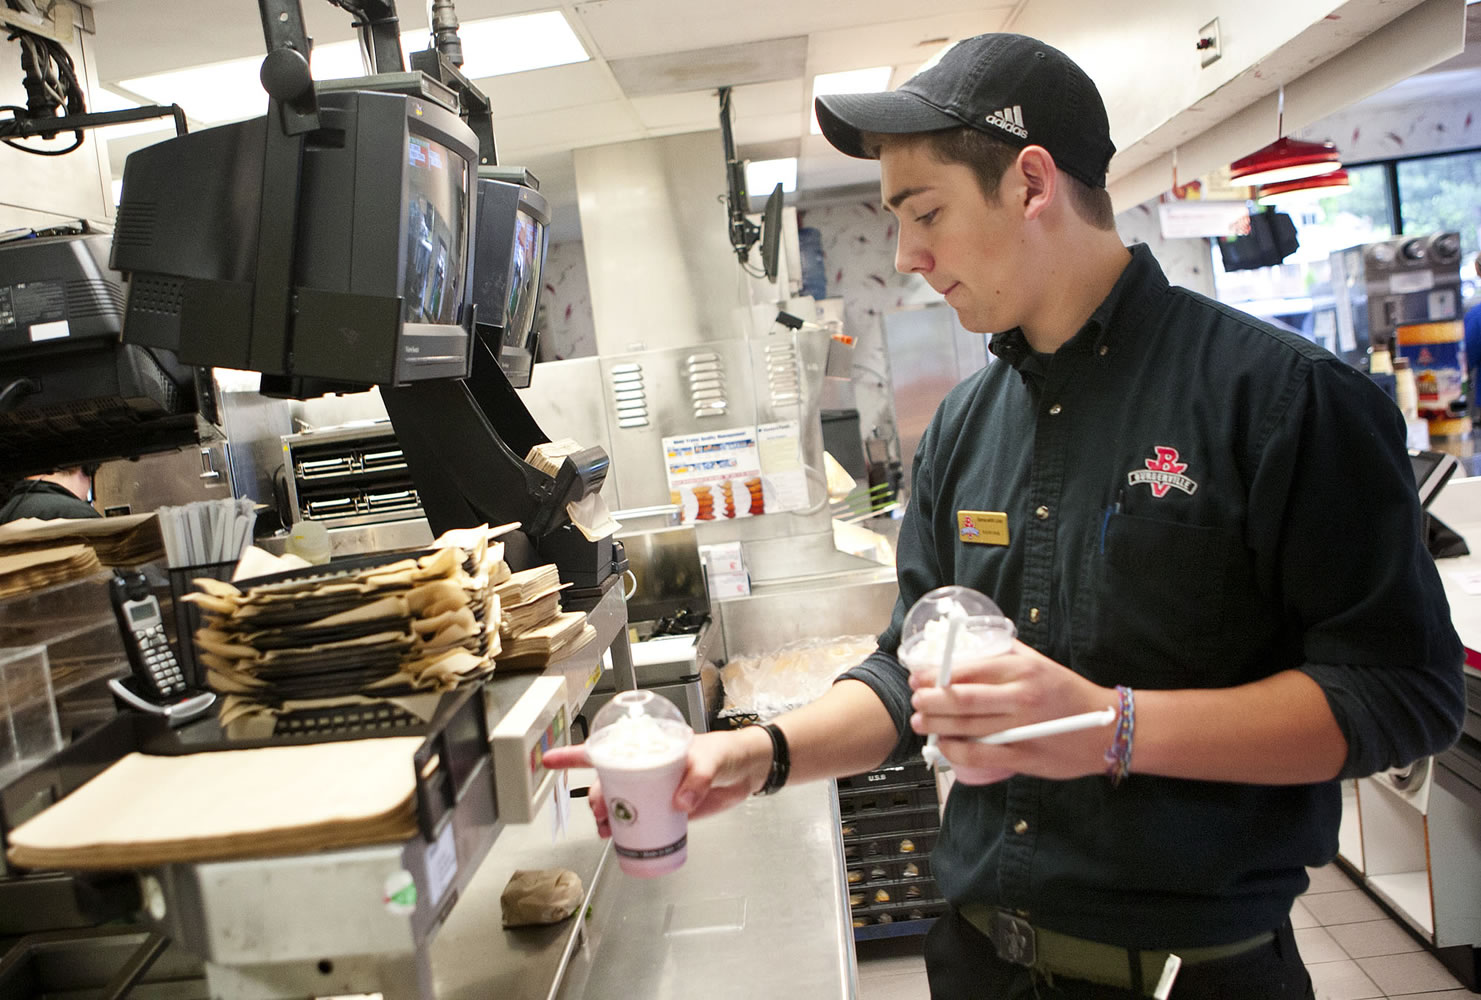 Lucas Schwartz, 17, clears an order before delivering shakes to customers during his shift June 30 at the Central Park Burgerville on East Fourth Plain Boulevard.